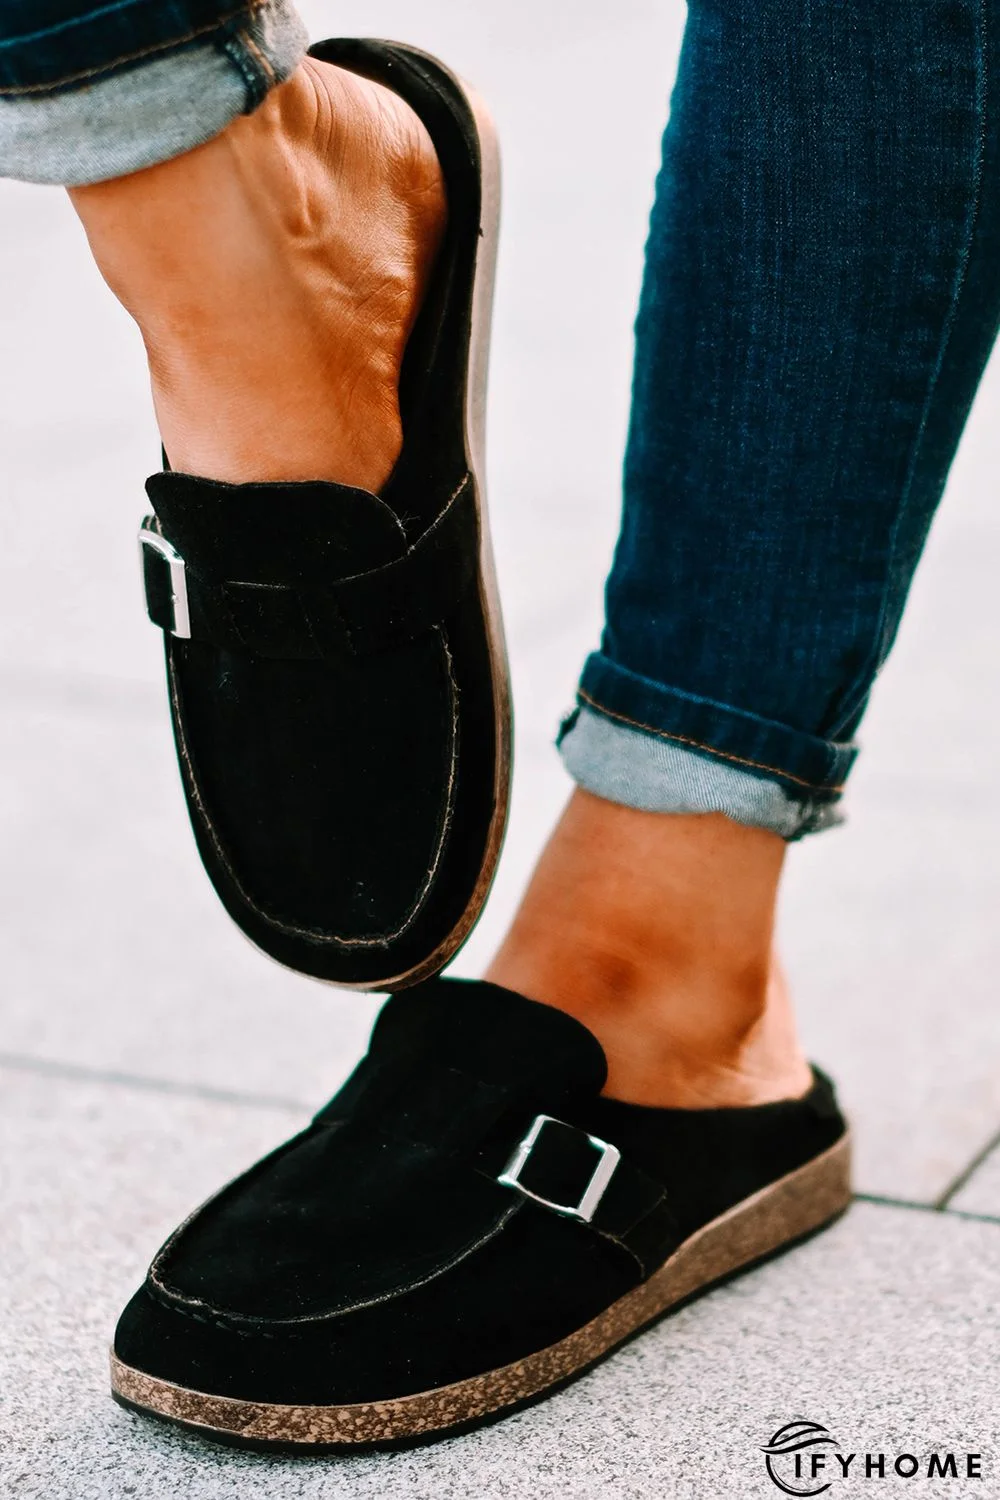 Black Faux Suede Buckle Detail Flat Mule Slippers | IFYHOME